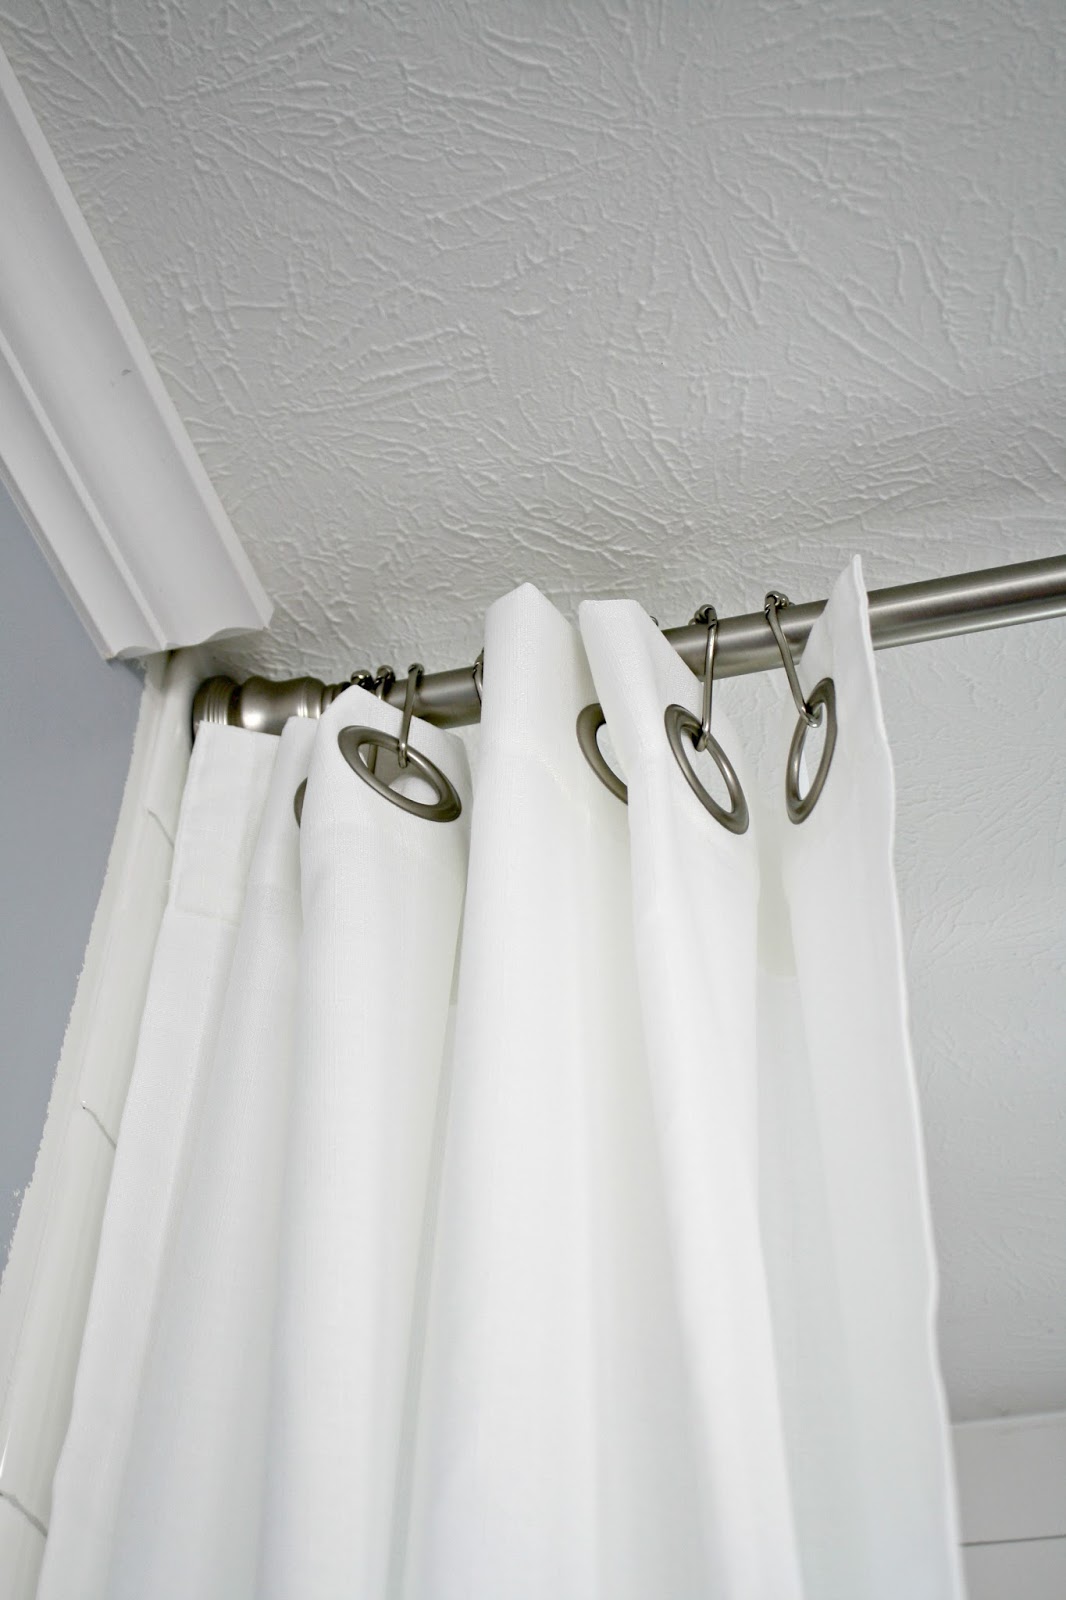 How To Hang Double Shower Curtains For, Can You Hang Grommet Curtains With Rings